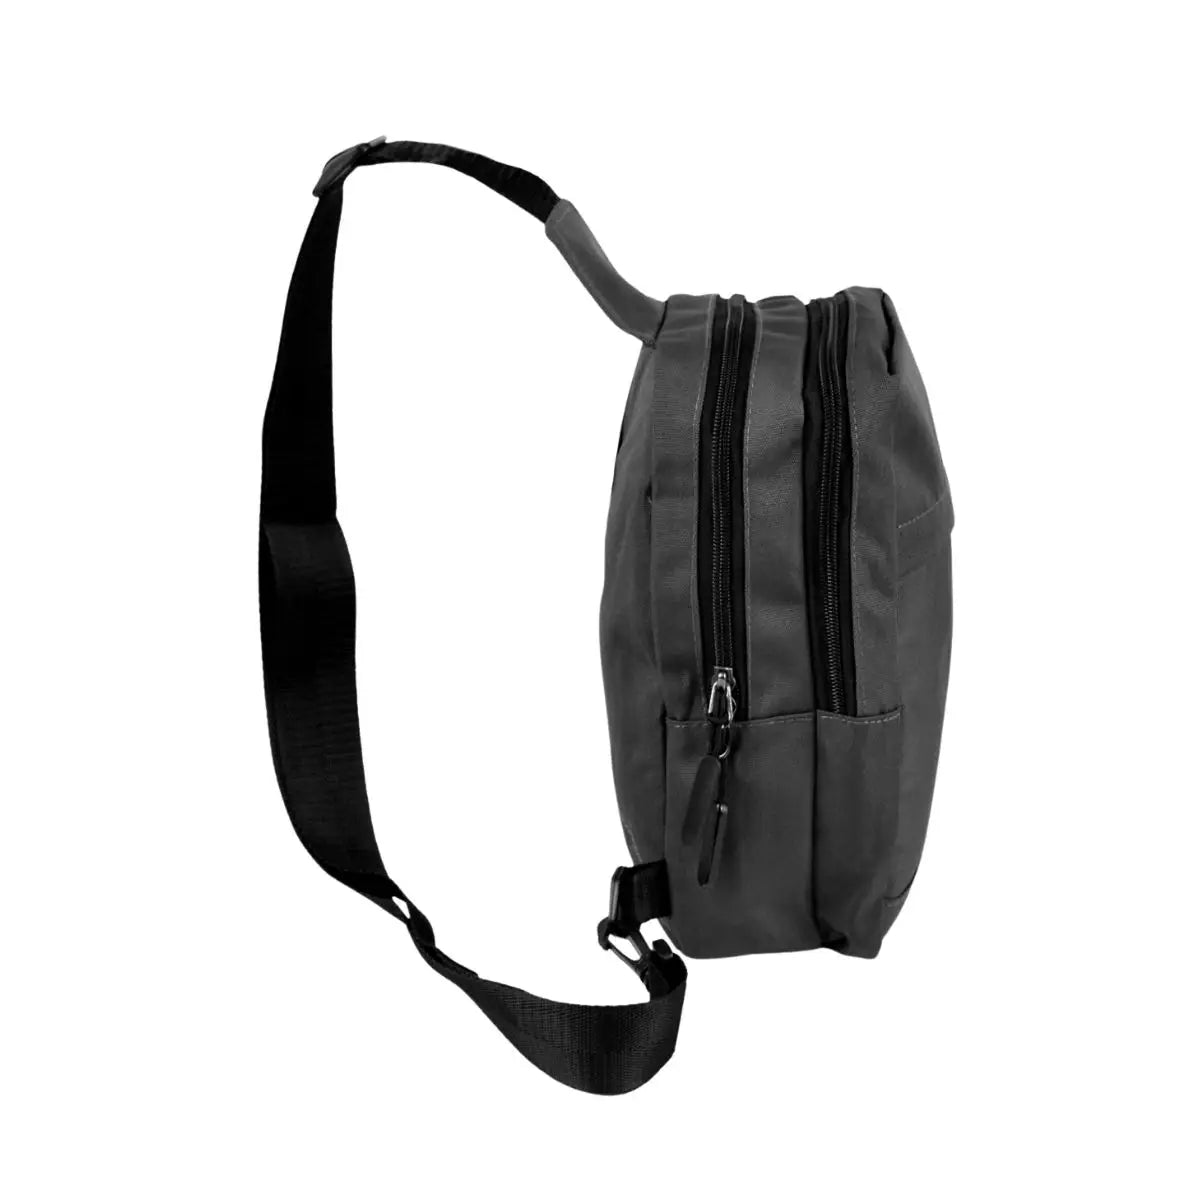 Crossbody Sling Bag with Reversible Strap